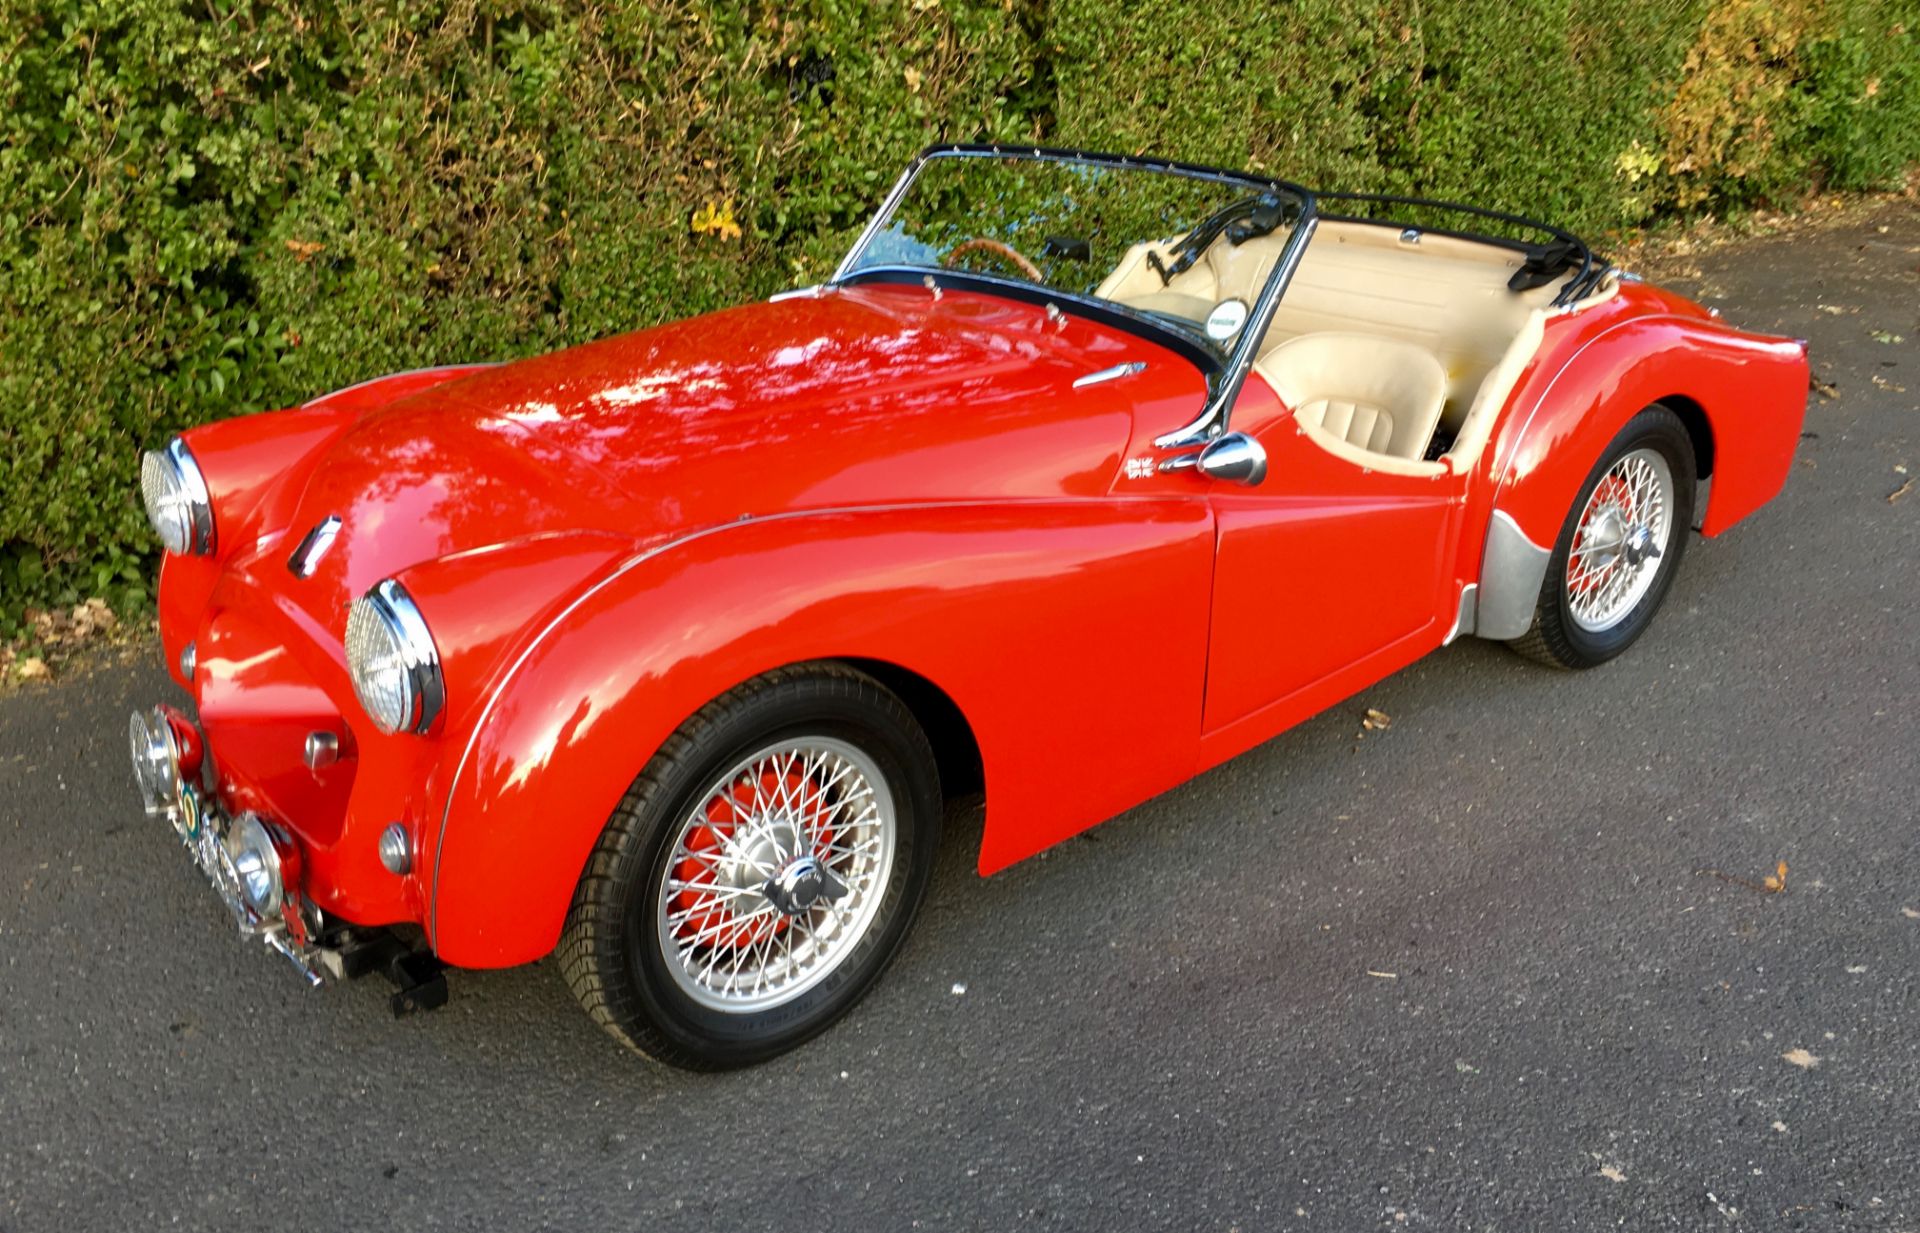 1954 Triumph TR2 Complete With Hard Top - Image 4 of 10